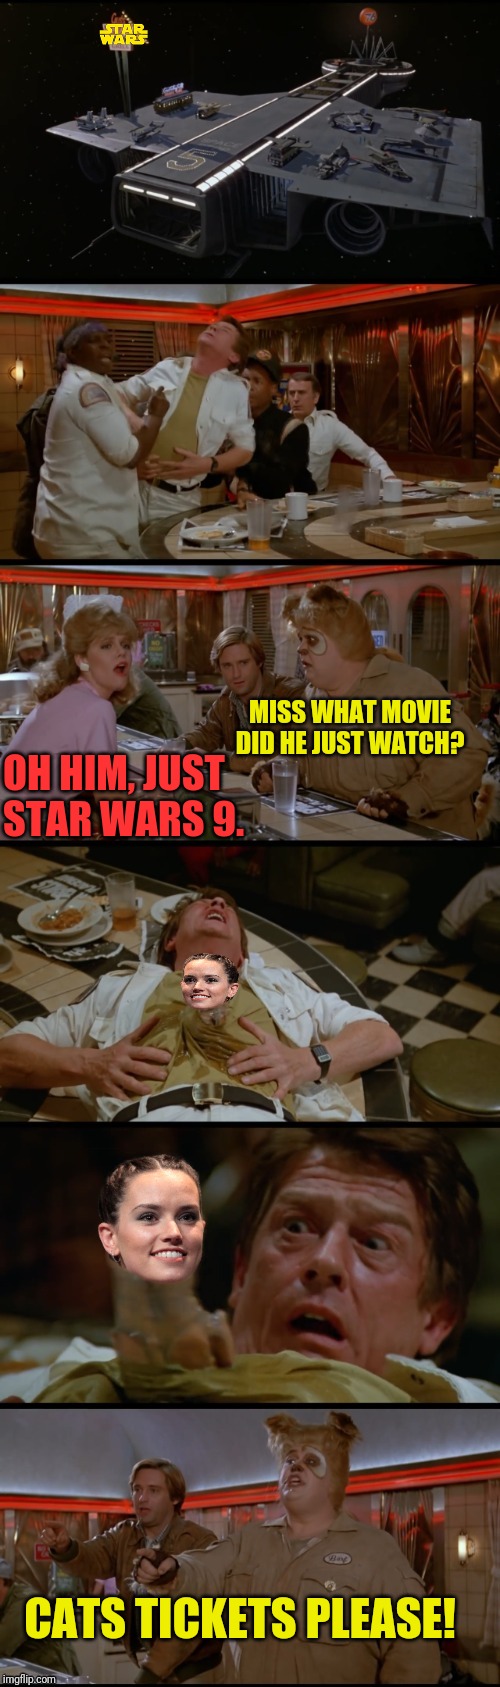 SPACEBALLS THE MEME | MISS WHAT MOVIE DID HE JUST WATCH? OH HIM, JUST STAR WARS 9. CATS TICKETS PLEASE! | image tagged in spaceballs,alien,star wars,disney killed star wars,daisy | made w/ Imgflip meme maker